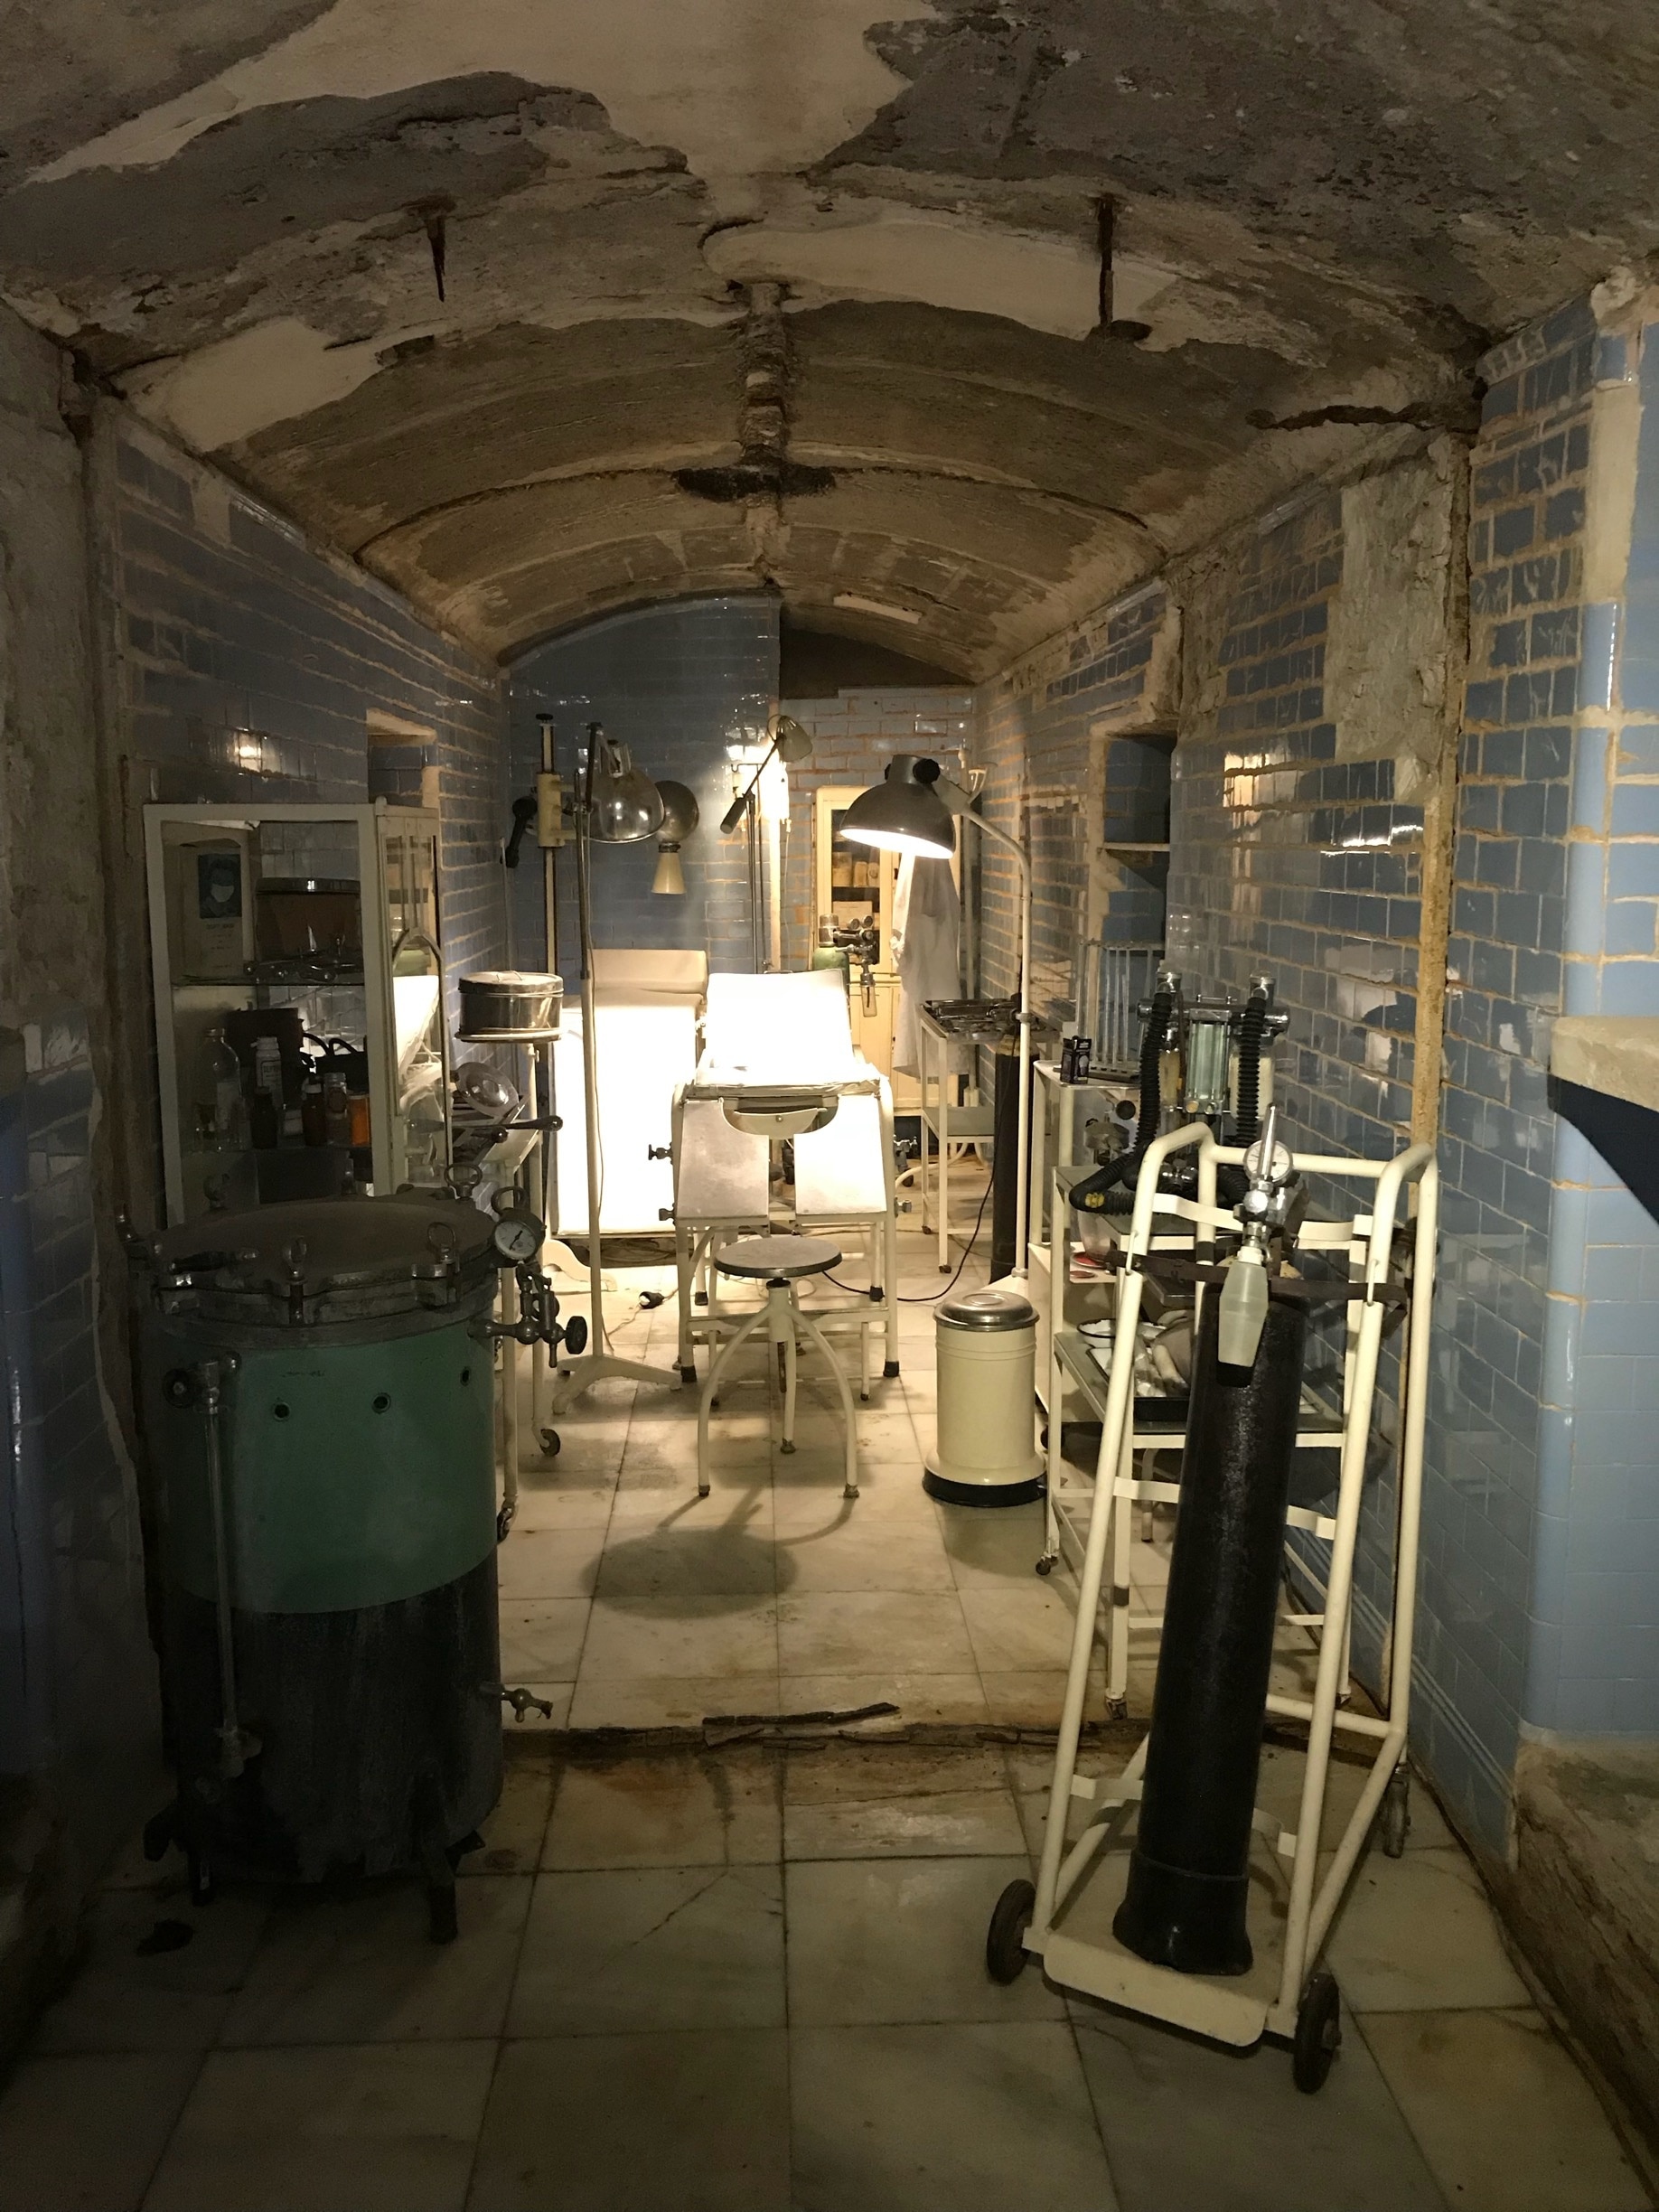 This was a really interesting tour of the tunnels that were used in the Spanish civil war. Here you can see some hospital equipment and even an old X-ray unit at the back ( I am a Radiographer so I find this interesting.)